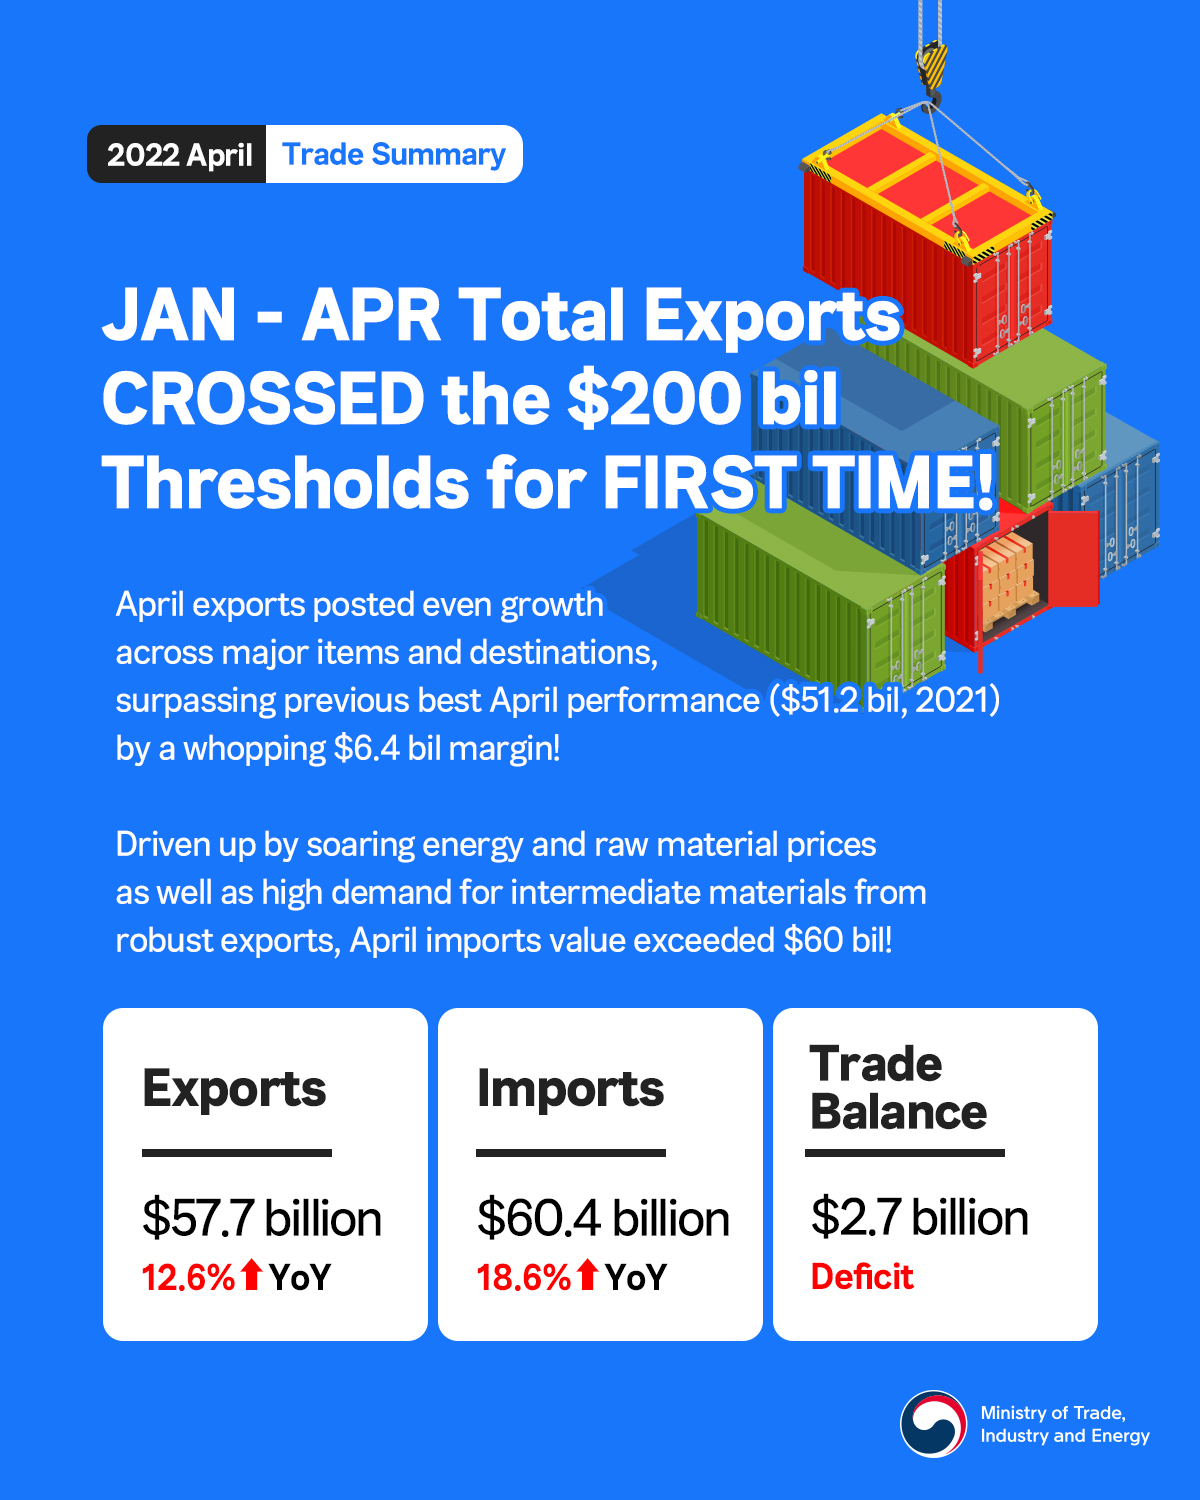 Korea's exports in Q1 2022 surpass $200 billion for first time! Image 0